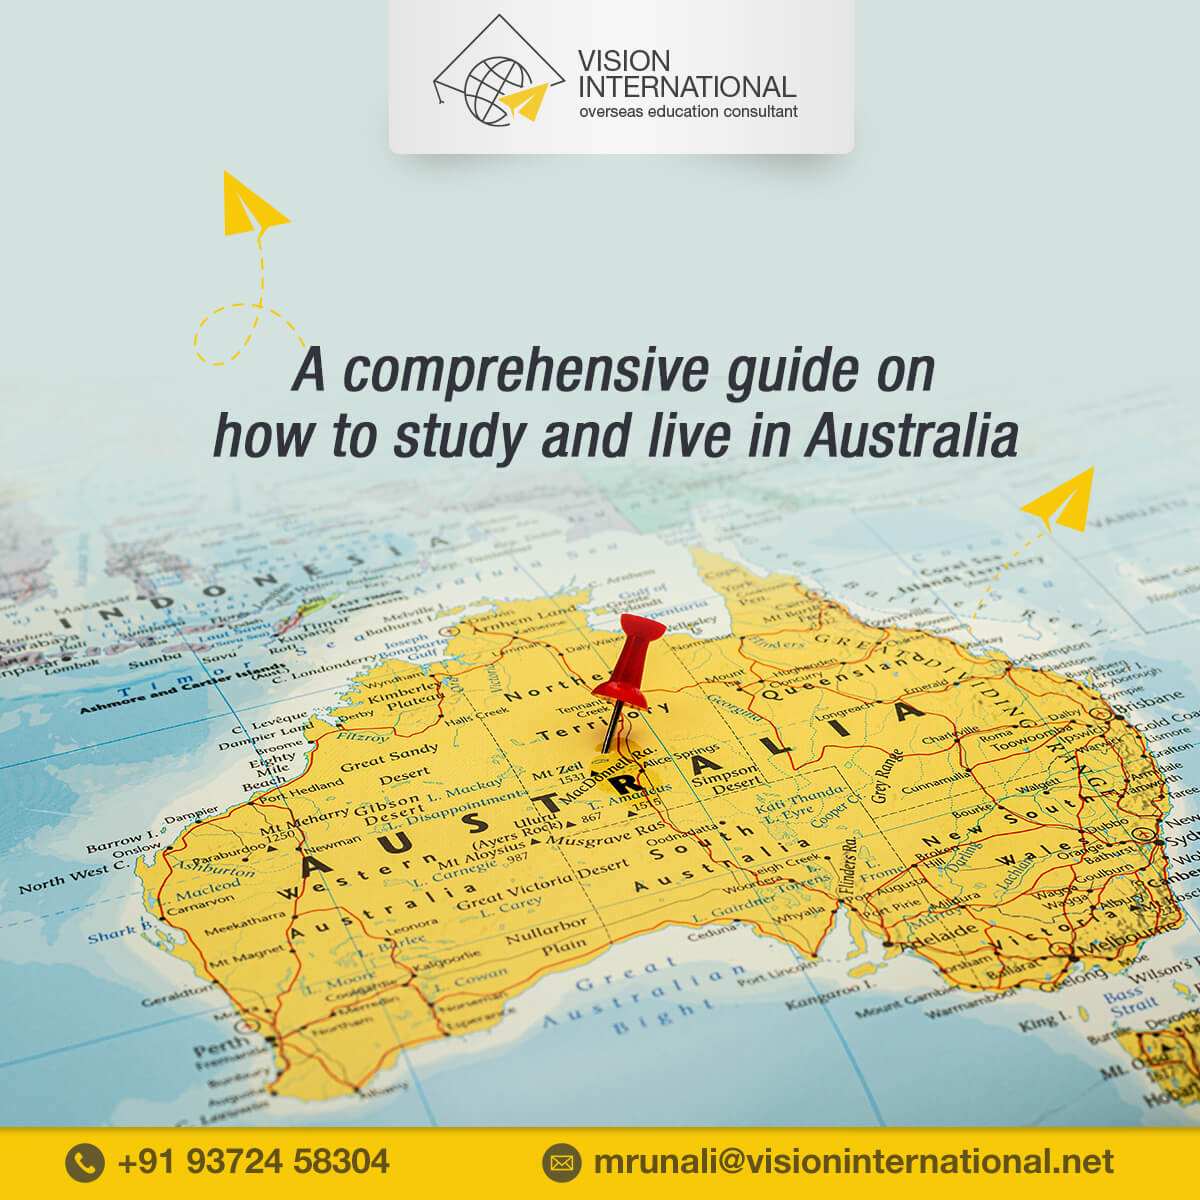 A comprehensive guide on how to study and live in Australia